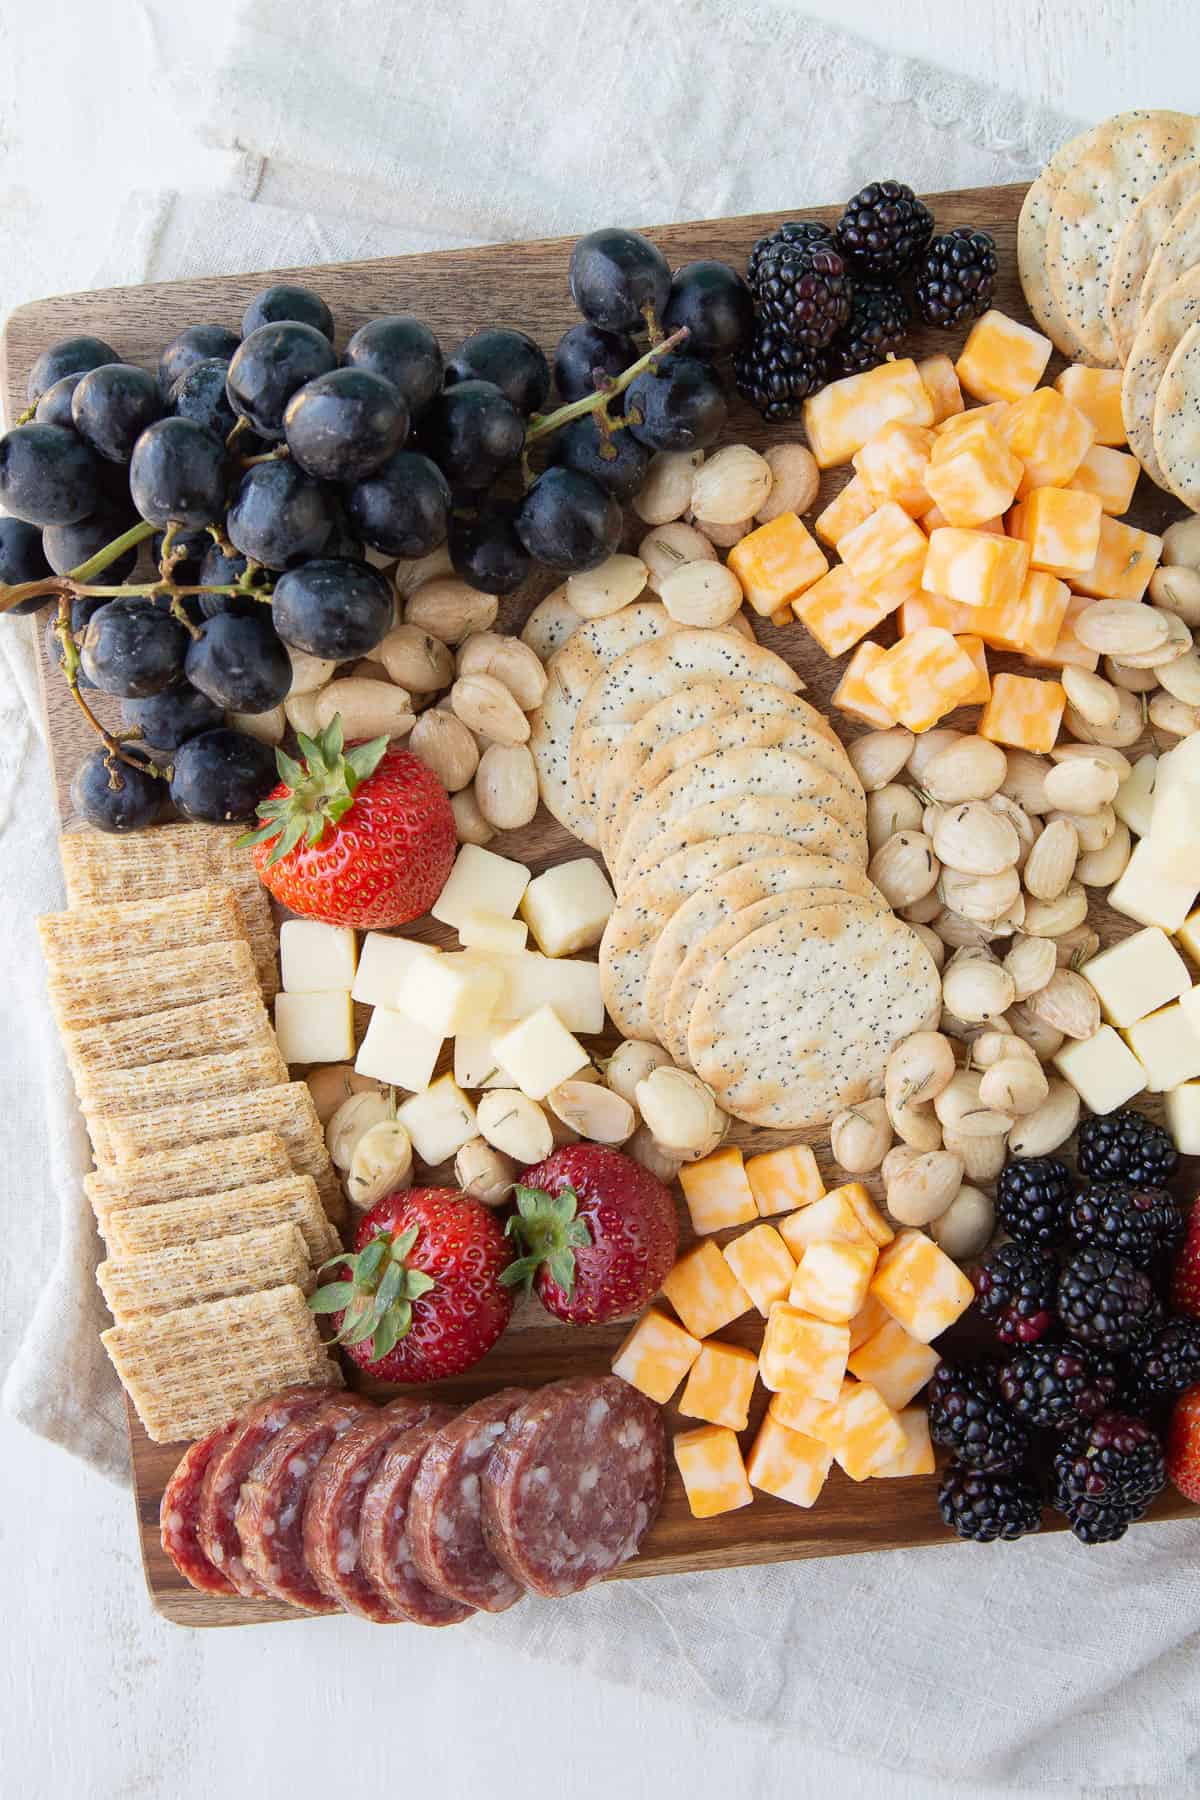 grapes, strawberries, crackers, cheese cubes, and almonds on a wooden board.